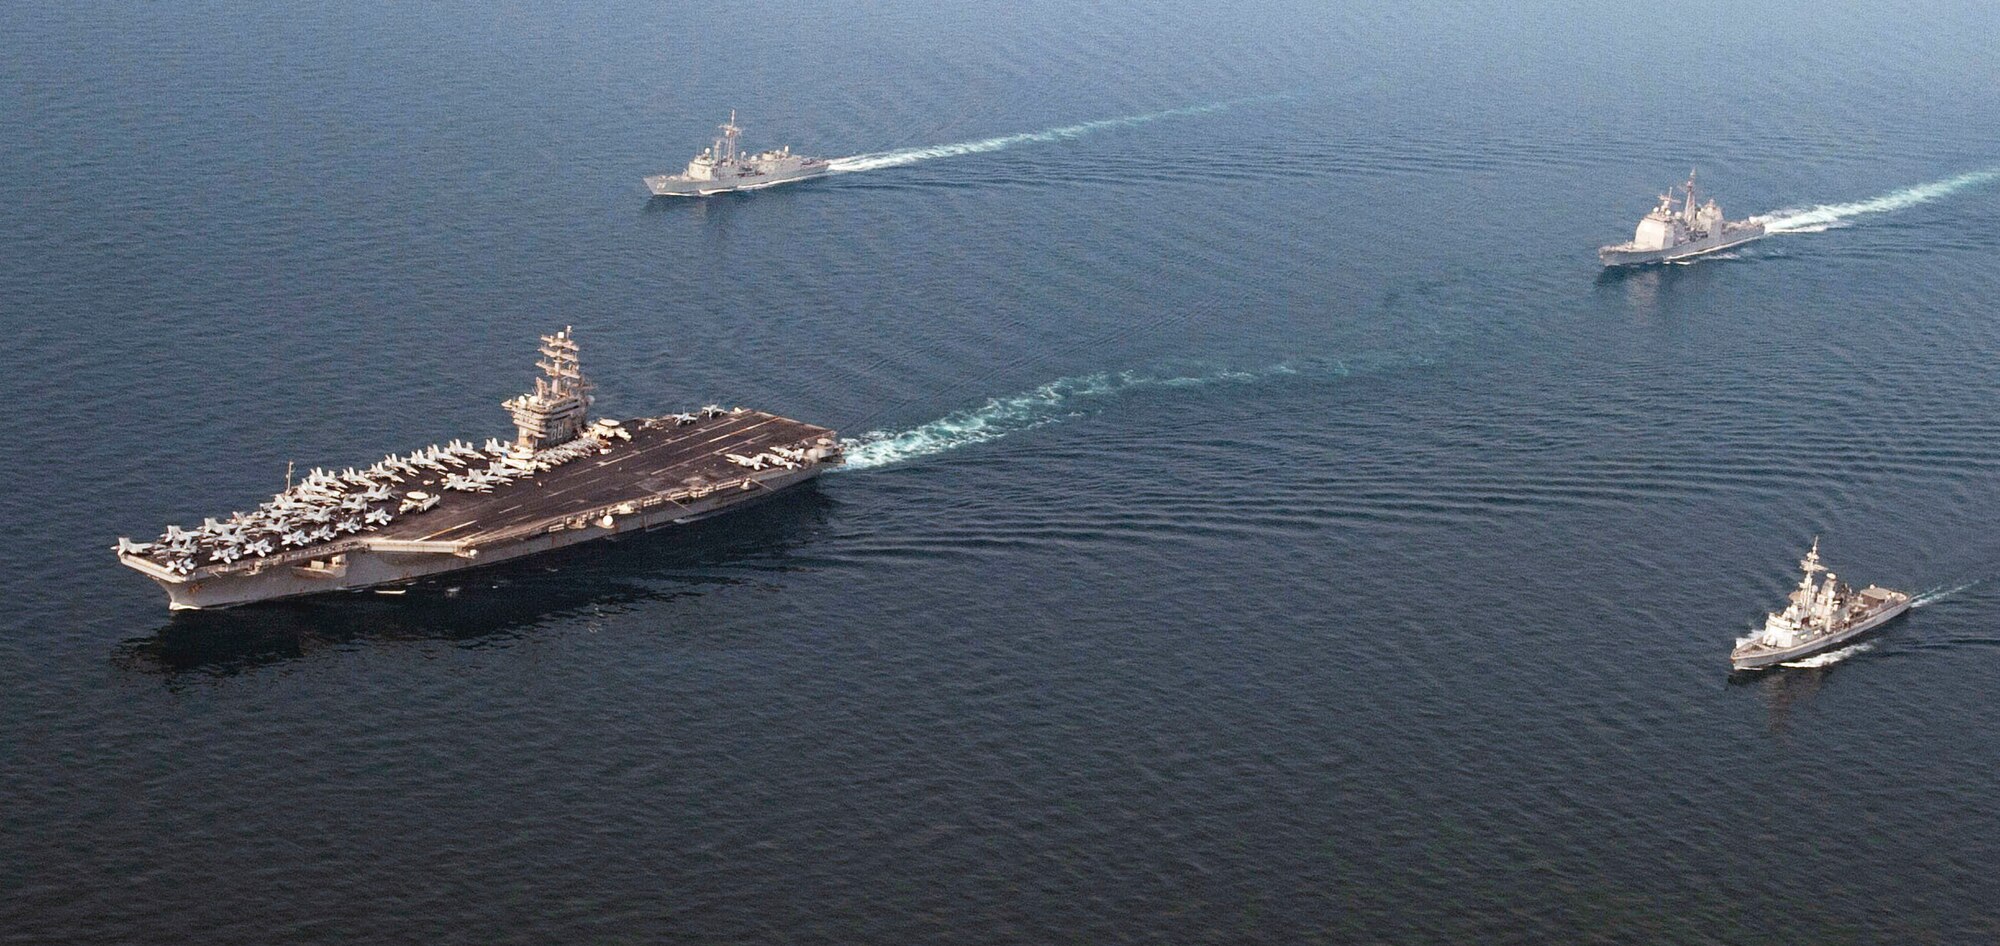 The aircraft carrier USS Nimitz (CVN 68), the Ticonderoga-class guided-missile cruiser USS Princeton (CG 59), the French Navy air defense destroyer FS Jean Bart (D615) and the Royal Australian Navy frigate HMAS Newcastle (FFG 06) conduct a formation group sail demonstrating combined interoperability and multinational partnership in support of Commander, Task Force 50 operations, Sept. 8, 2017, in the Arabian Gulf. Program Executive Office Digital at Hanscom Air Force Base, Mass., is working toward better integration of the intelligence, surveillance and reconnaissance systems that inform combatant commanders by coding a shared infrastructure that joins the services separate Distributed Common Ground Systems into a single hub for information. (U.S. Navy photo by Mass Communication Specialist 3rd Class Ian Kinkead)